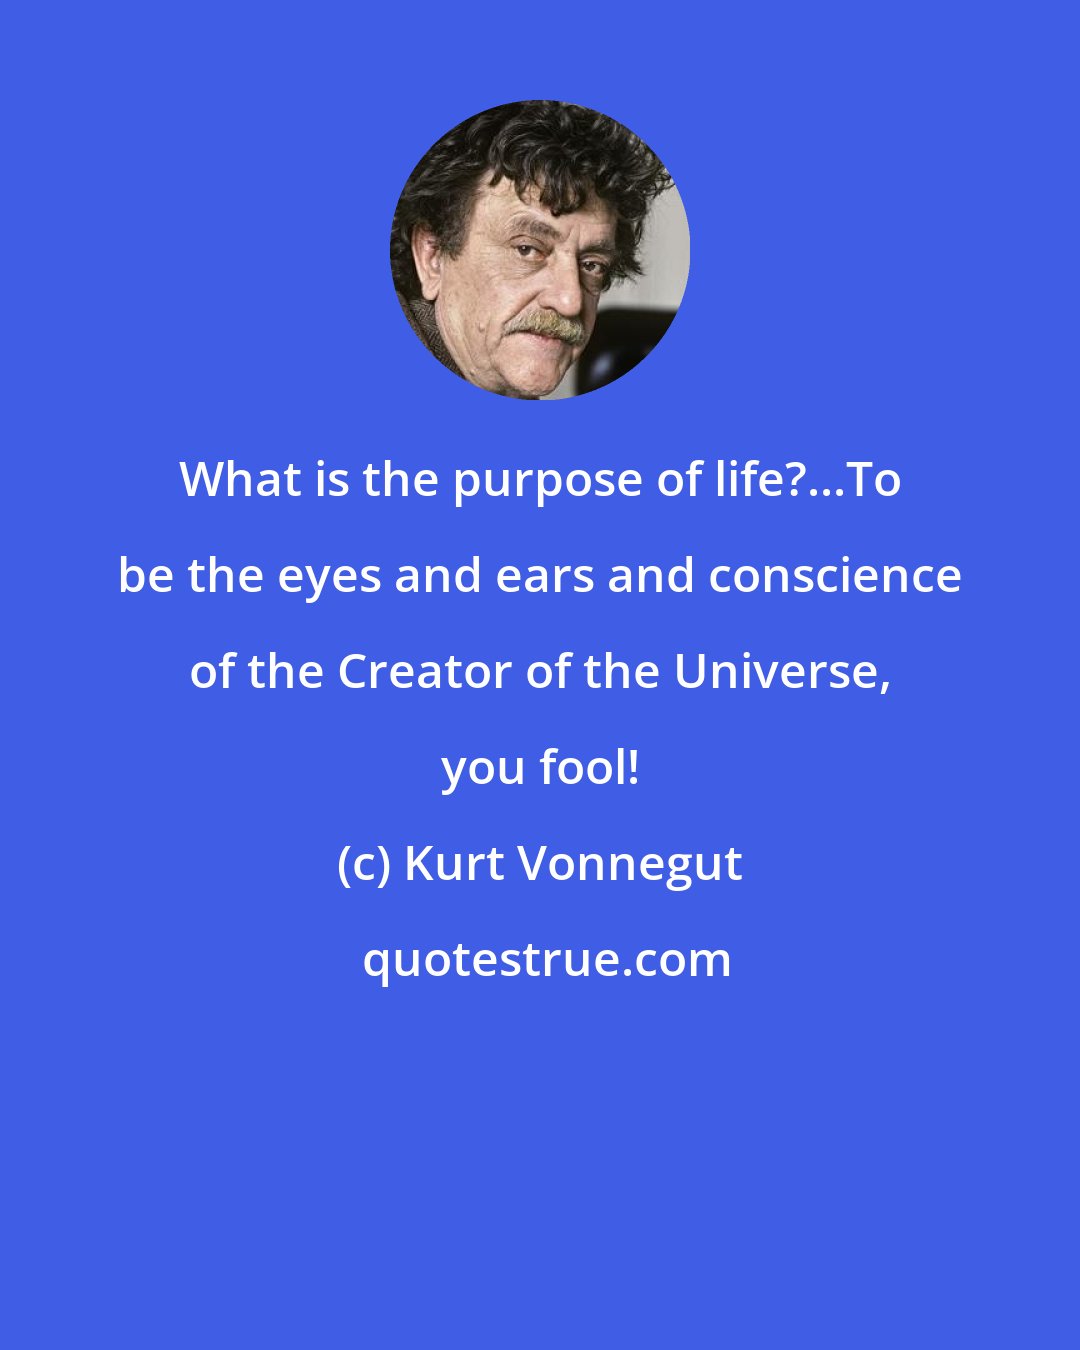 Kurt Vonnegut: What is the purpose of life?...To be the eyes and ears and conscience of the Creator of the Universe, you fool!